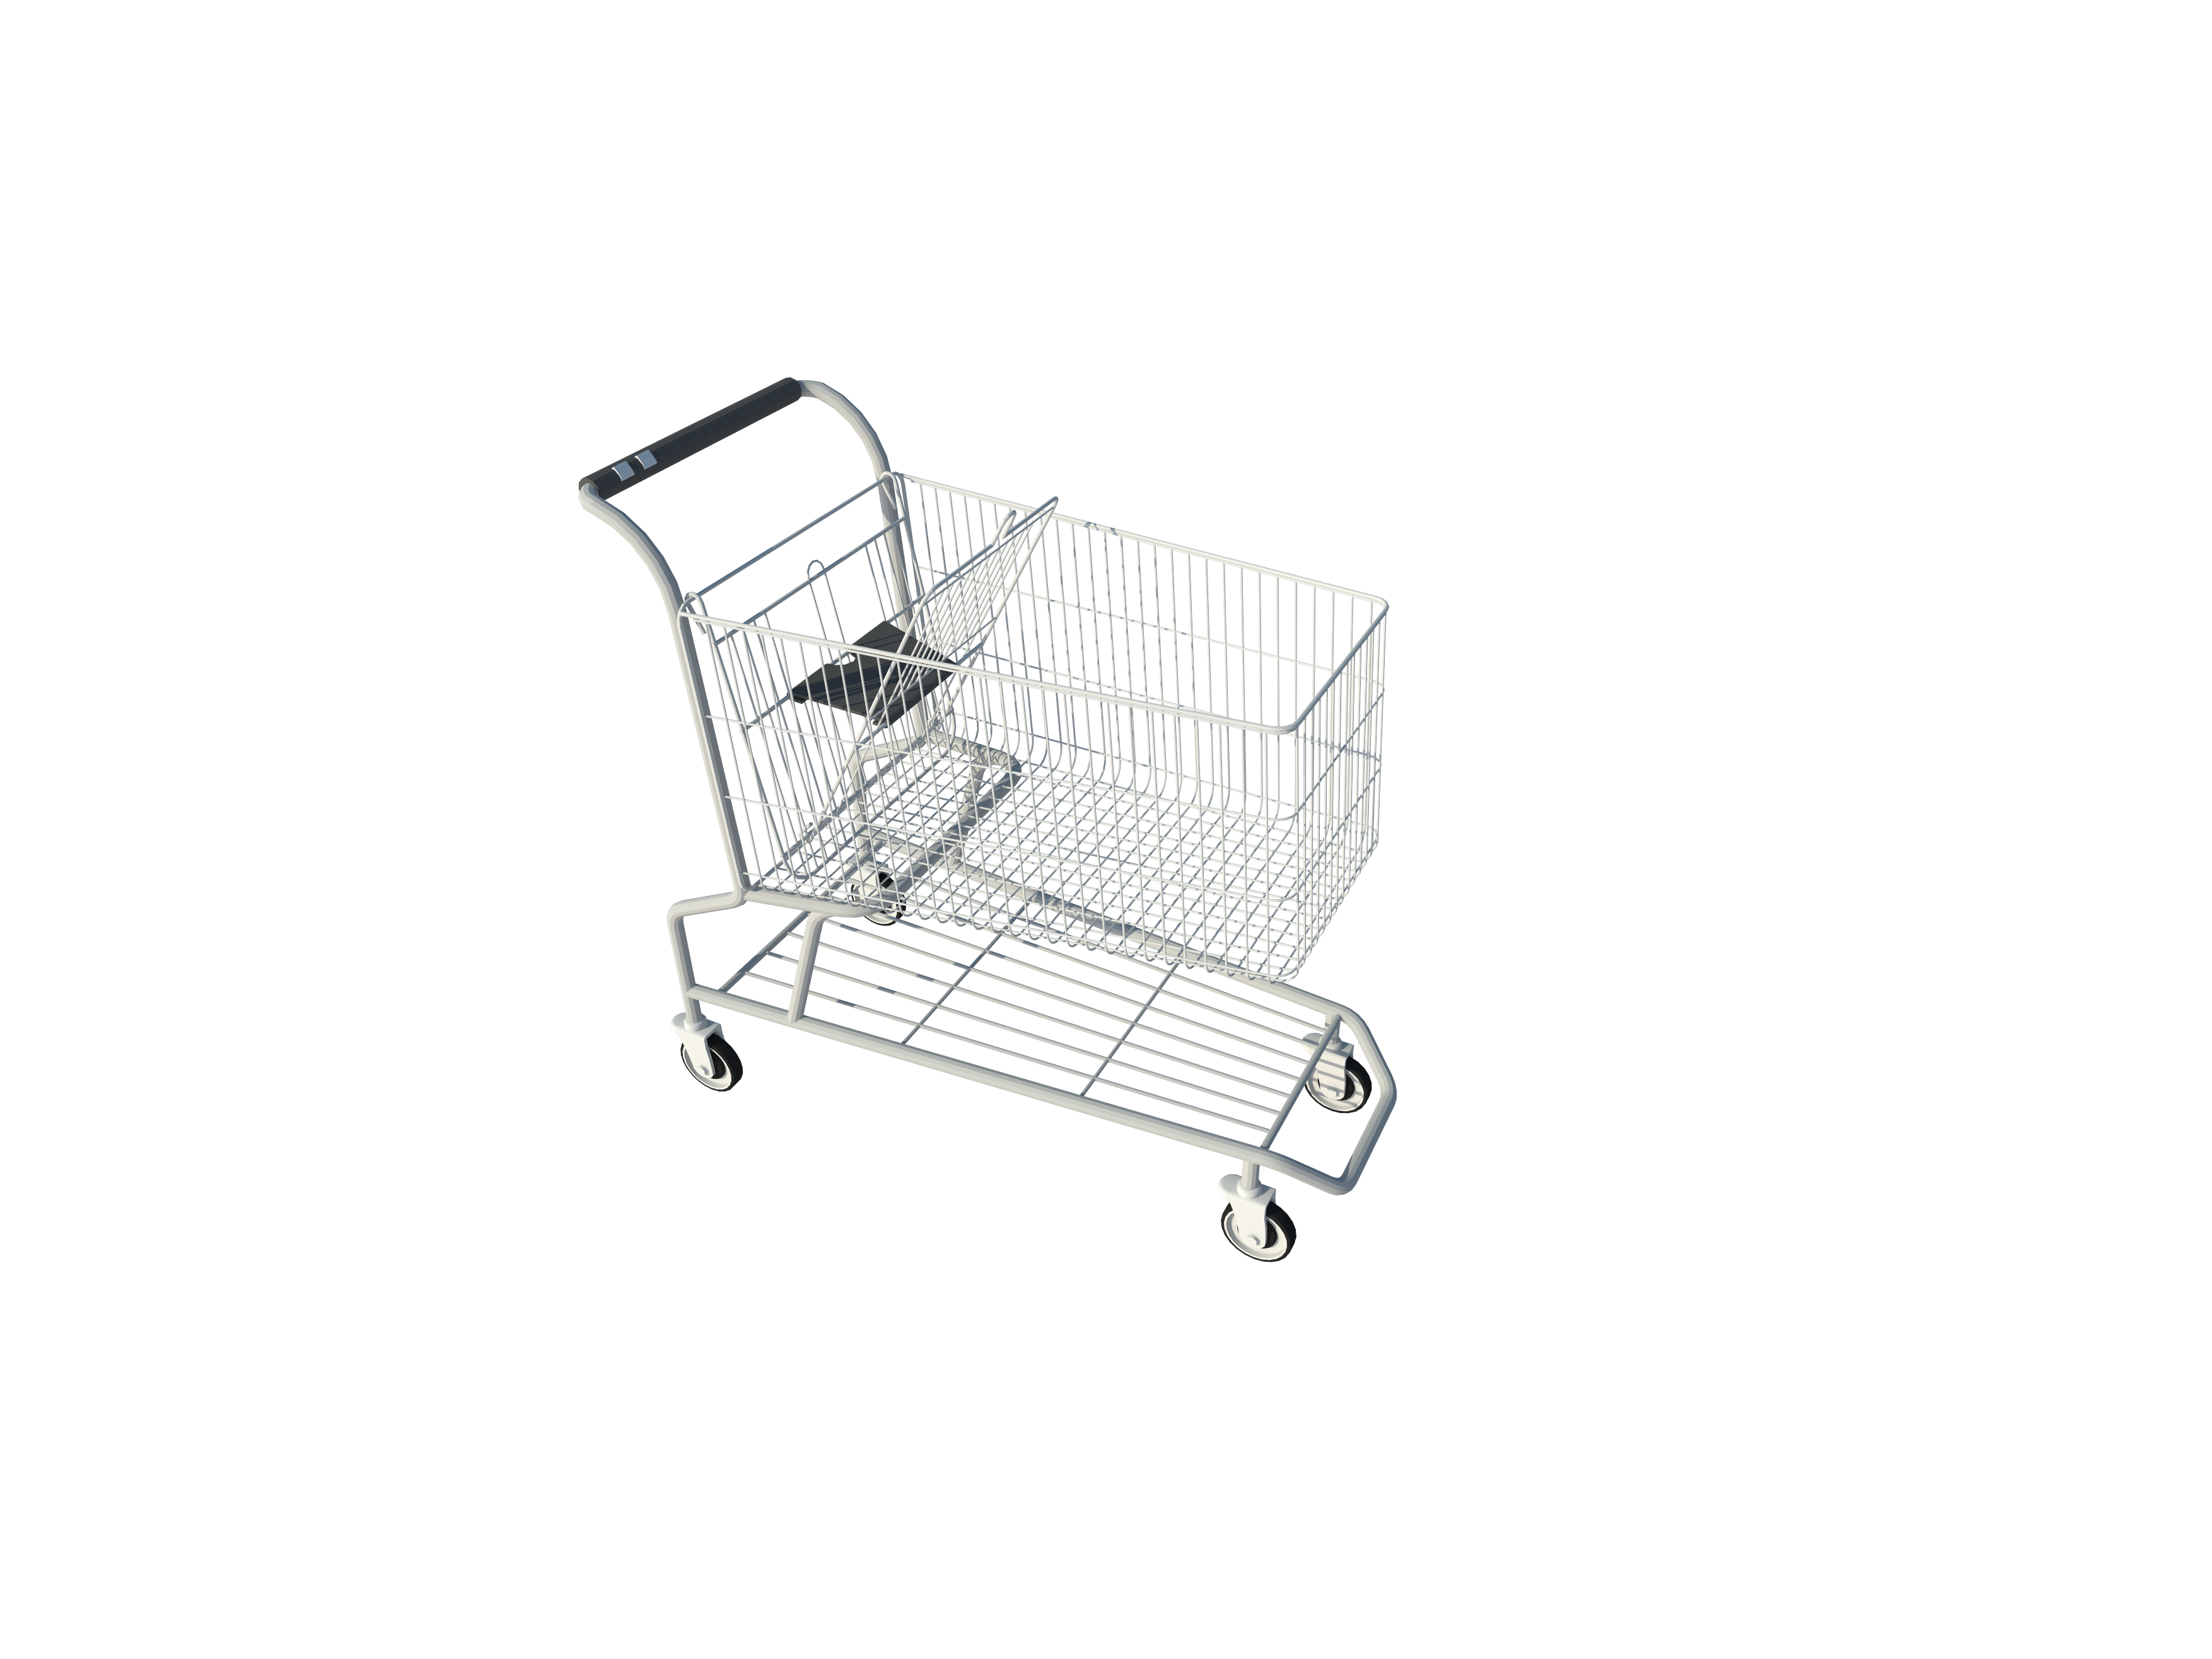 The Smart Cart will provide a braking system for shopping carts, thus provide added safety